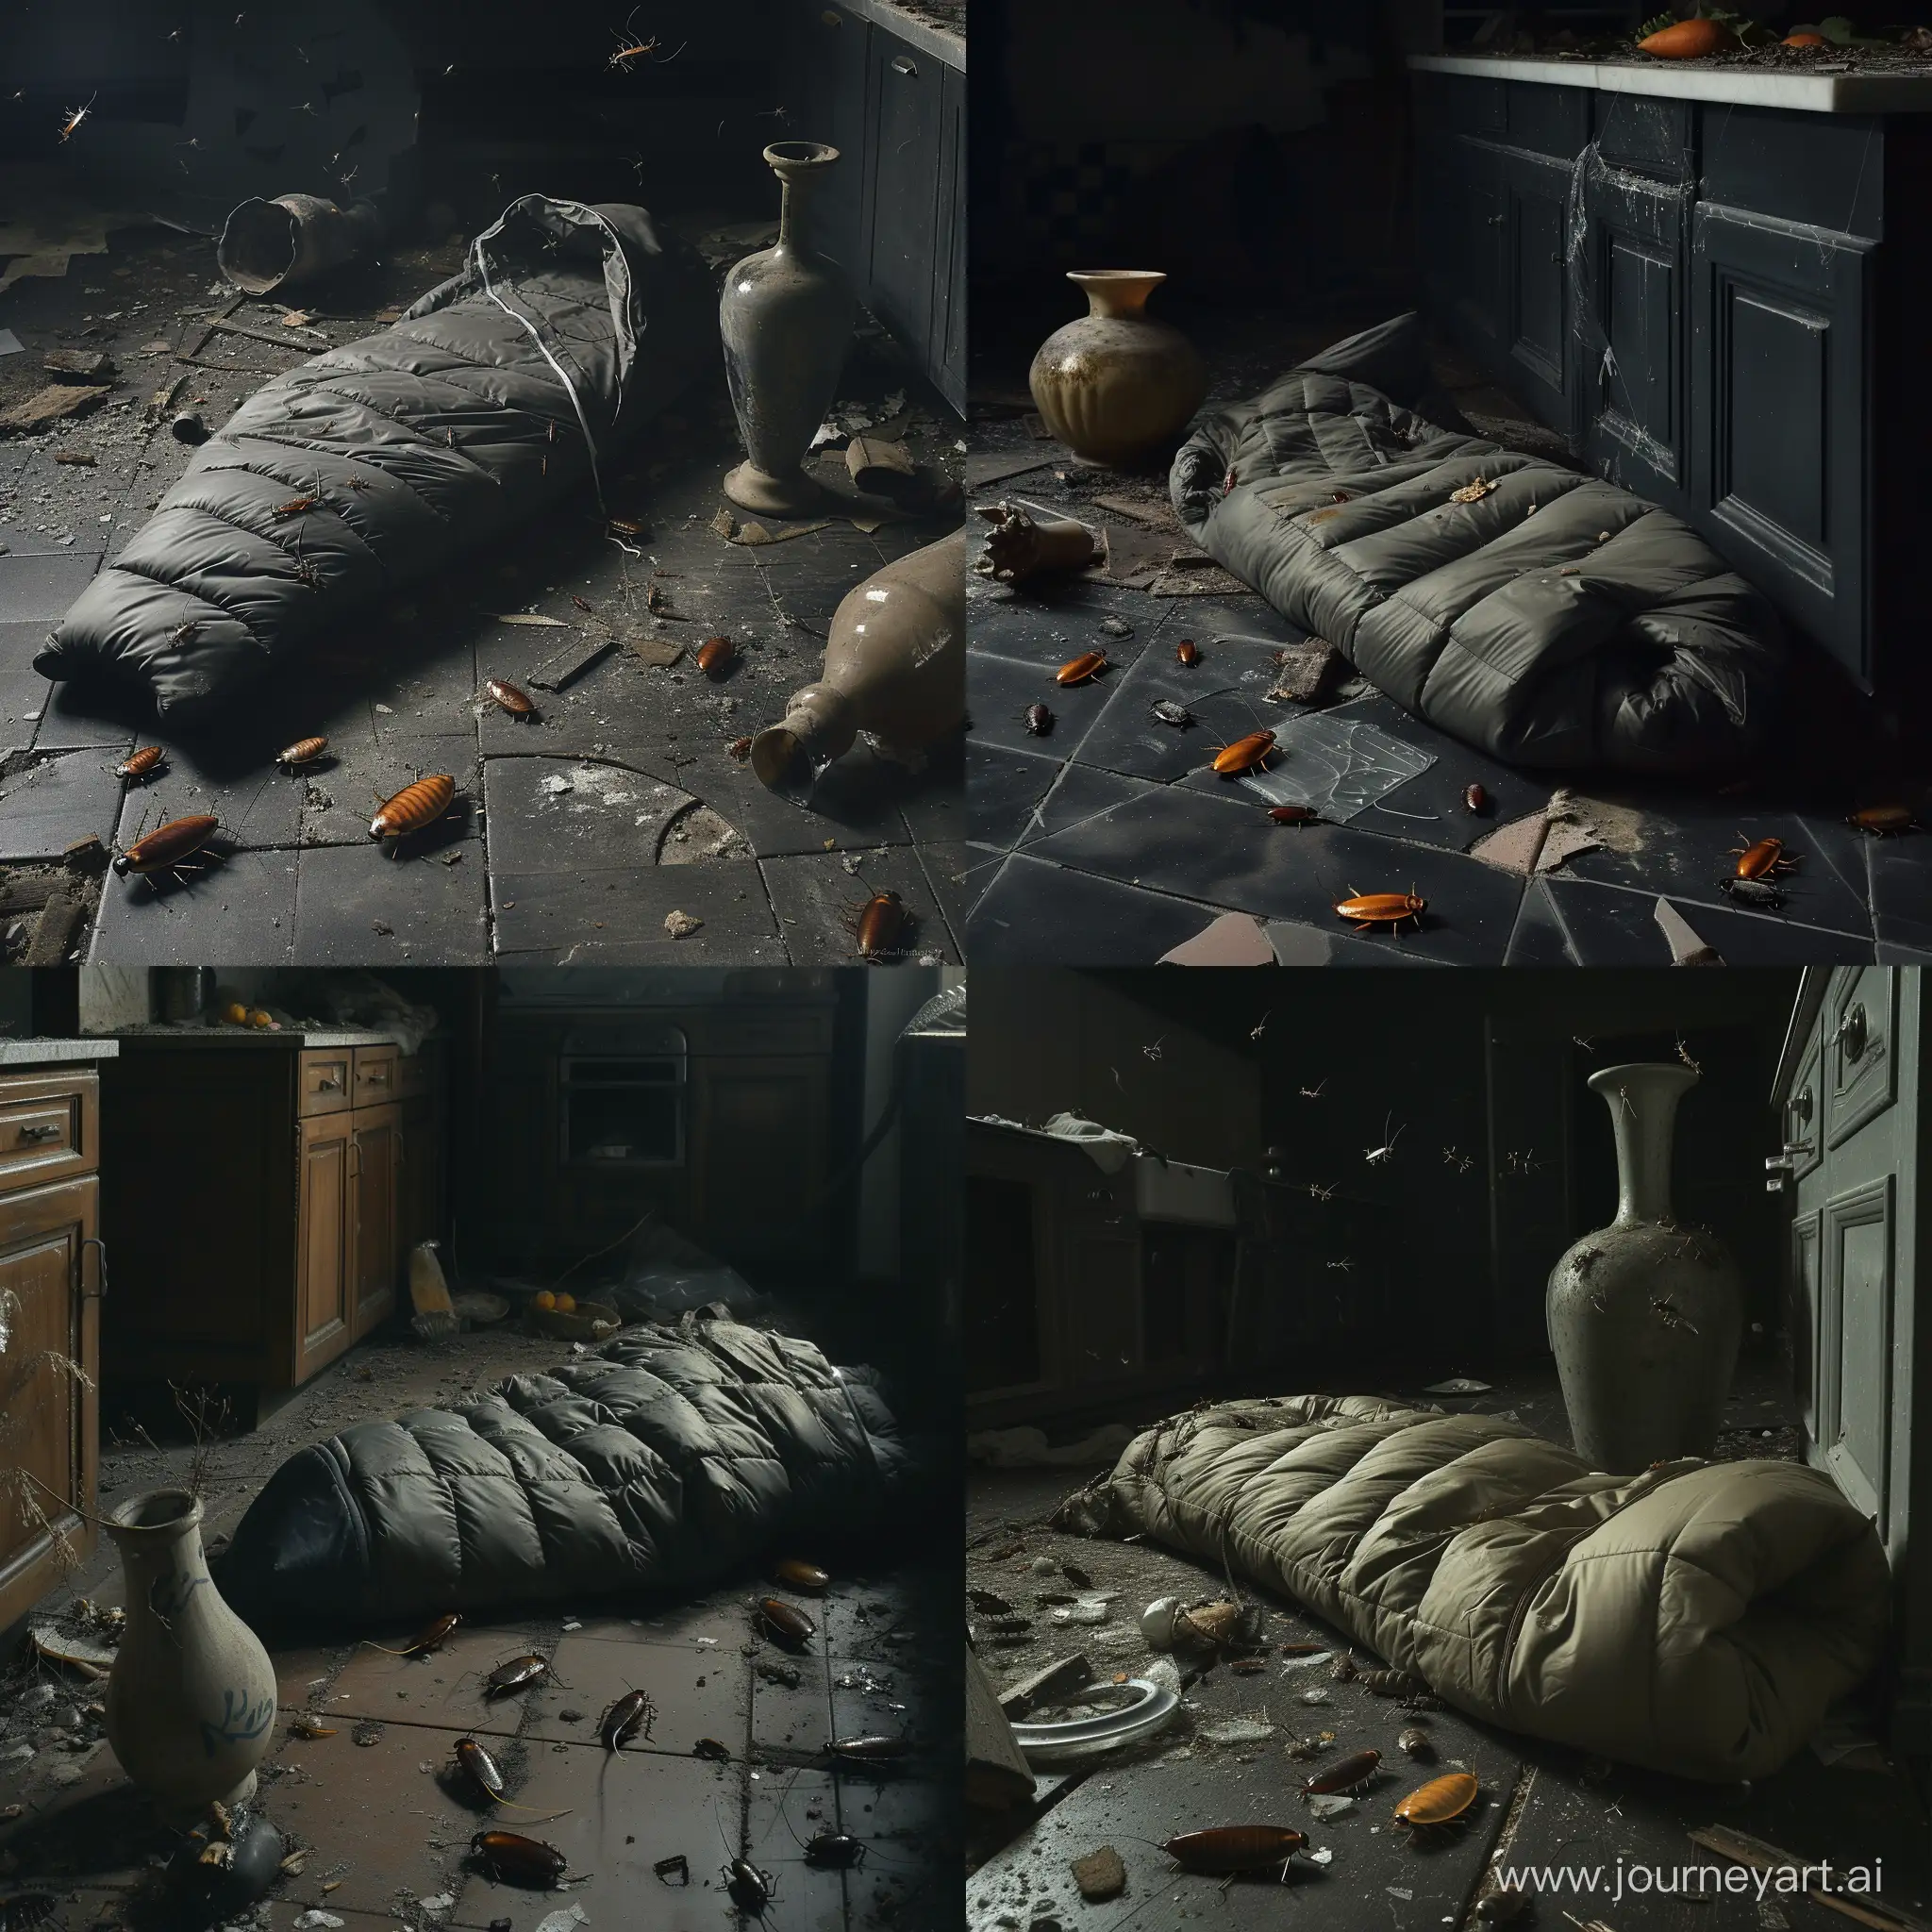 Abandoned-Kitchen-Horror-Dark-Scene-with-Sleeping-Bag-Insects-and-Broken-Vase